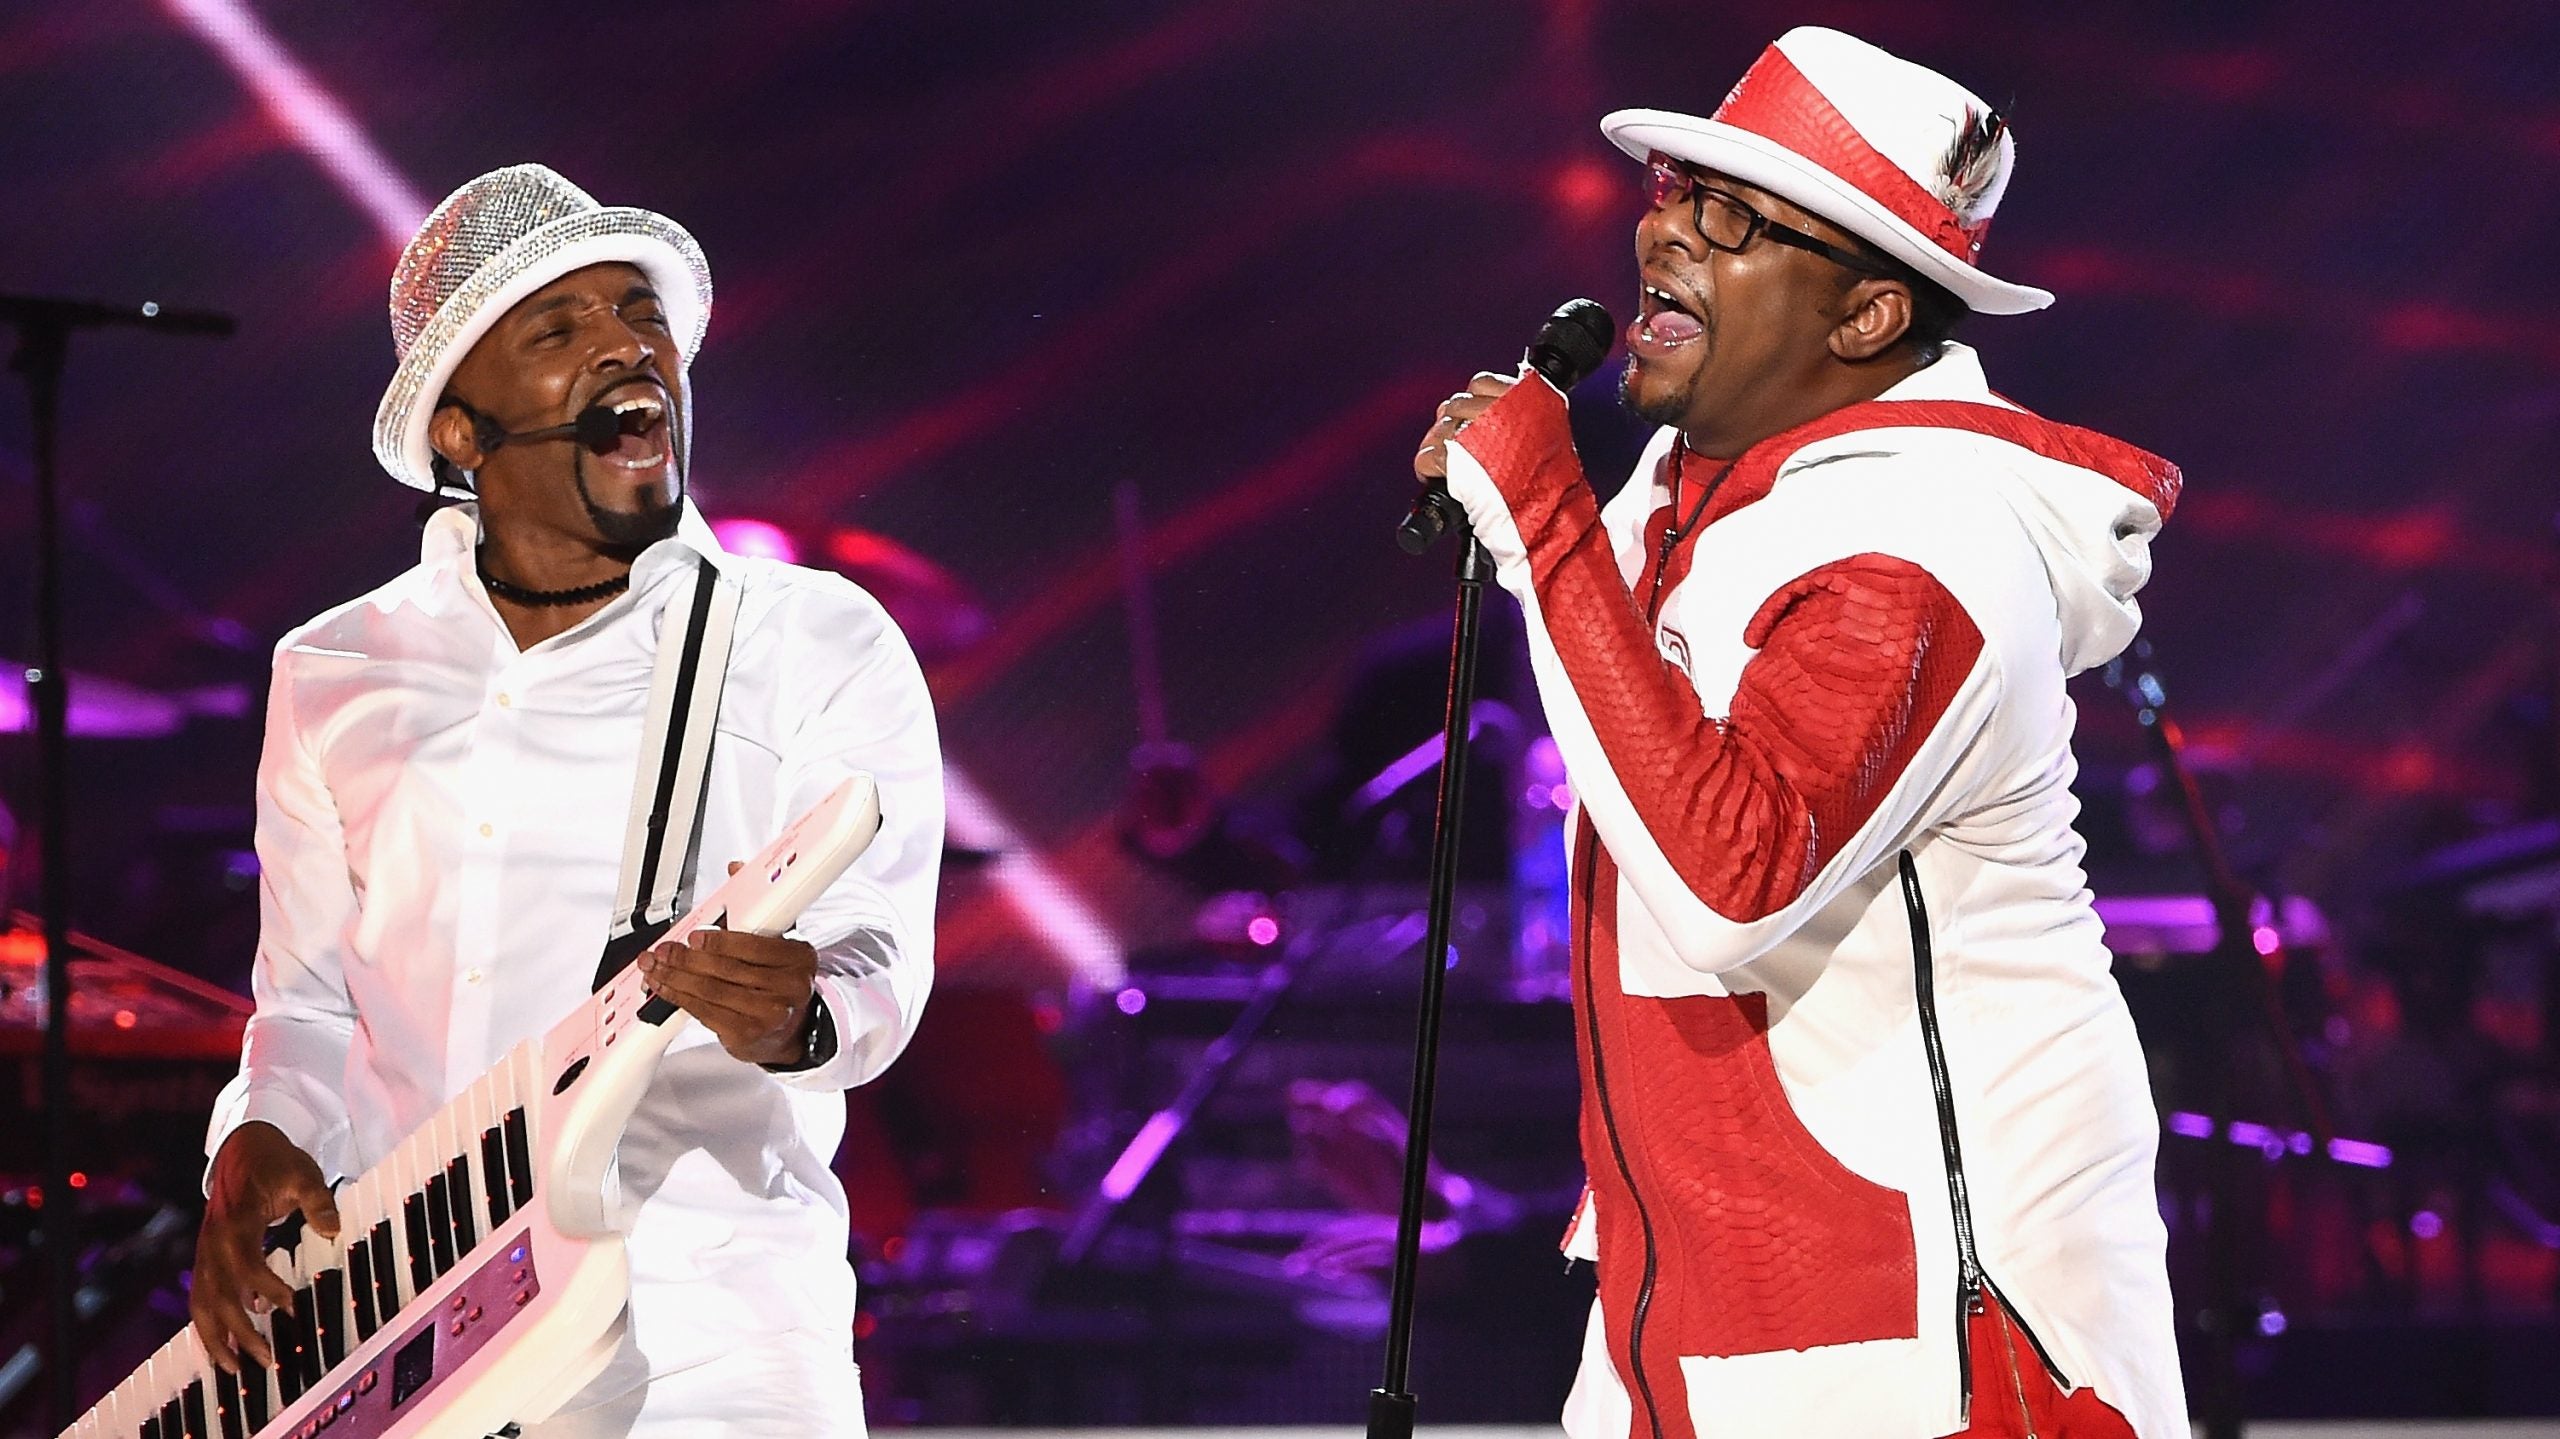 Teddy Riley Says He And Bobby Brown Had Beef While Recording ‘My Prerogative’